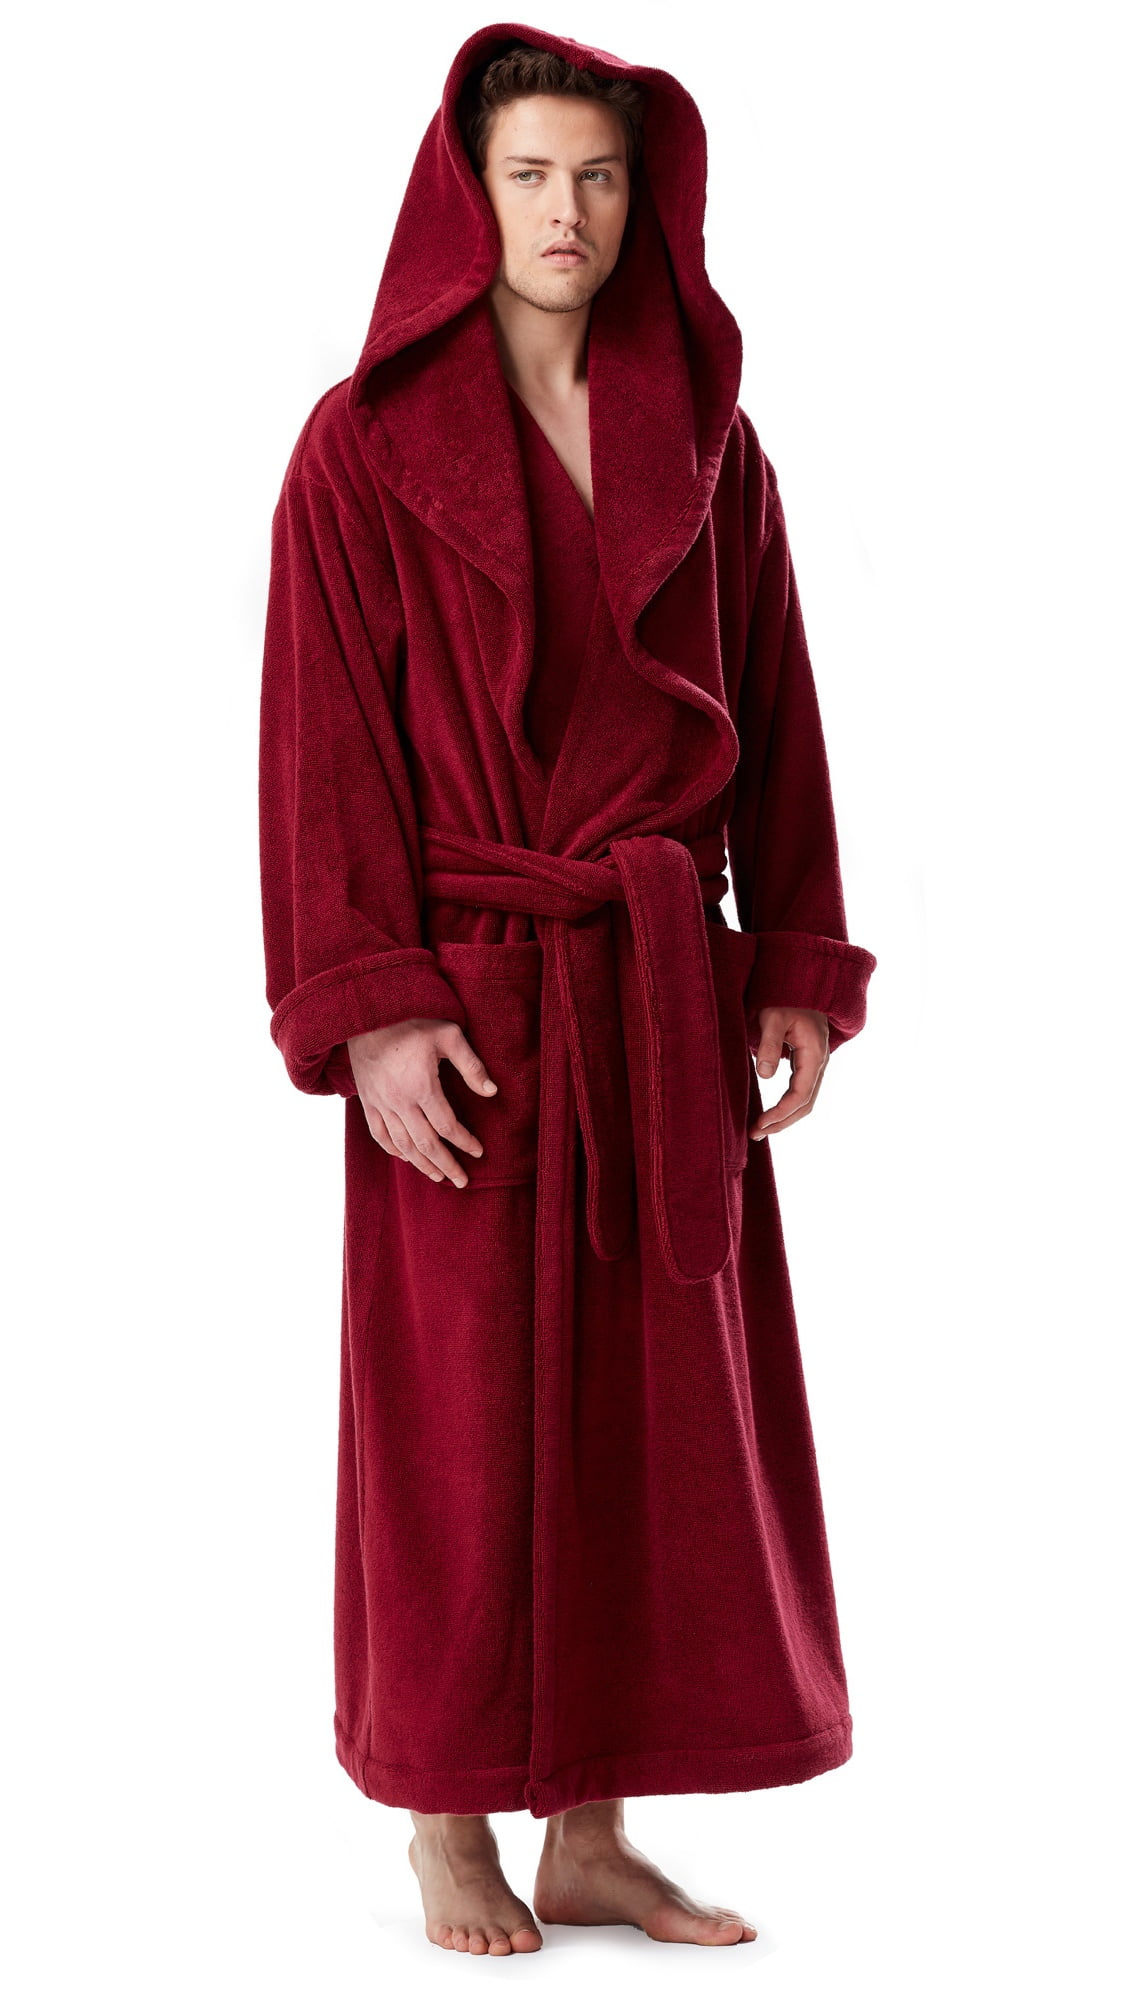 Men's Luxury Medieval Monk Robe Style Full Length Hooded Turkish Terry ...